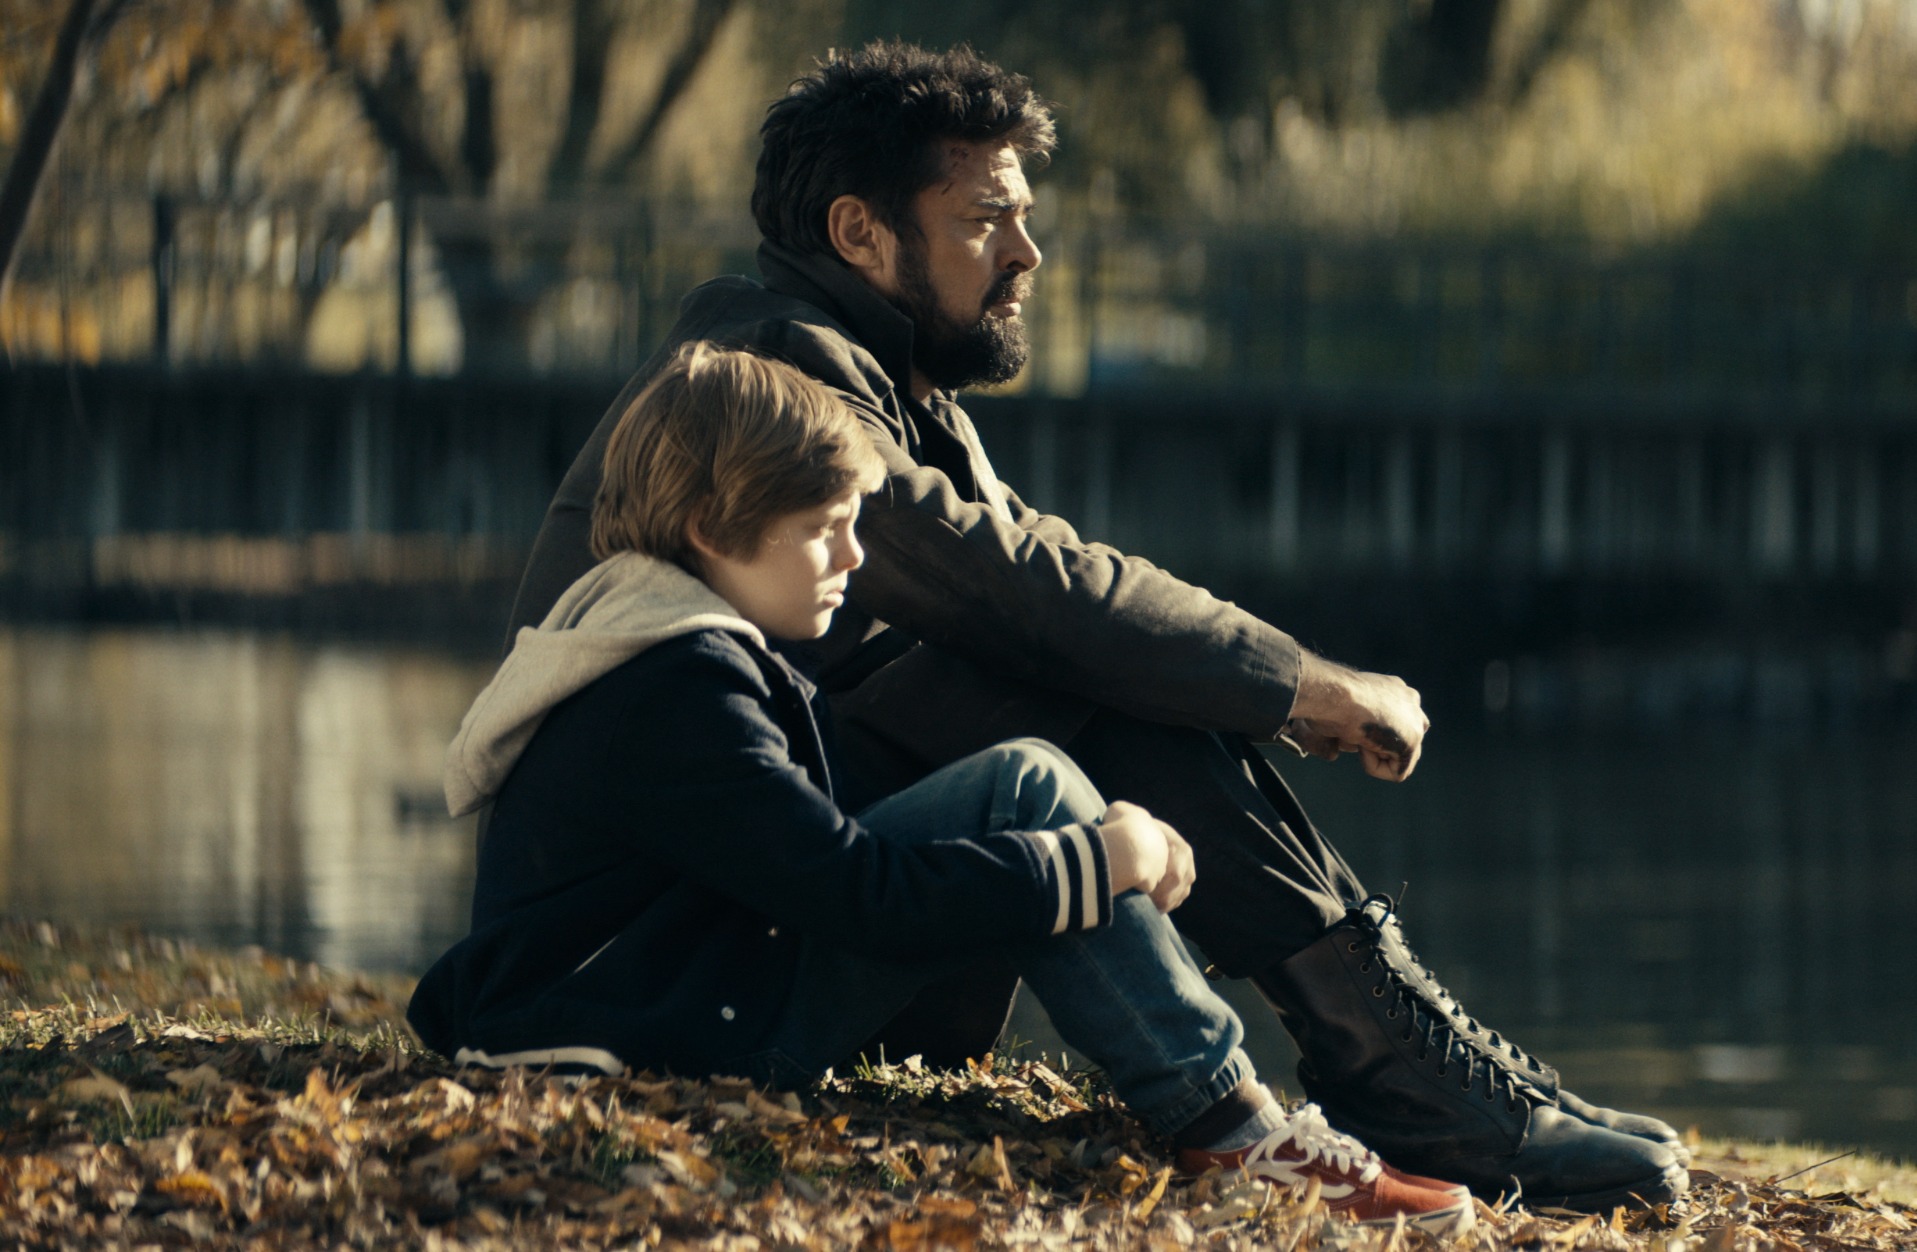 Cameron Crovetti and Karl Urban in 'The Boys' Season 2, which raises questions heading into season 3. The two are sitting next to one another on the grass and looking out at something.